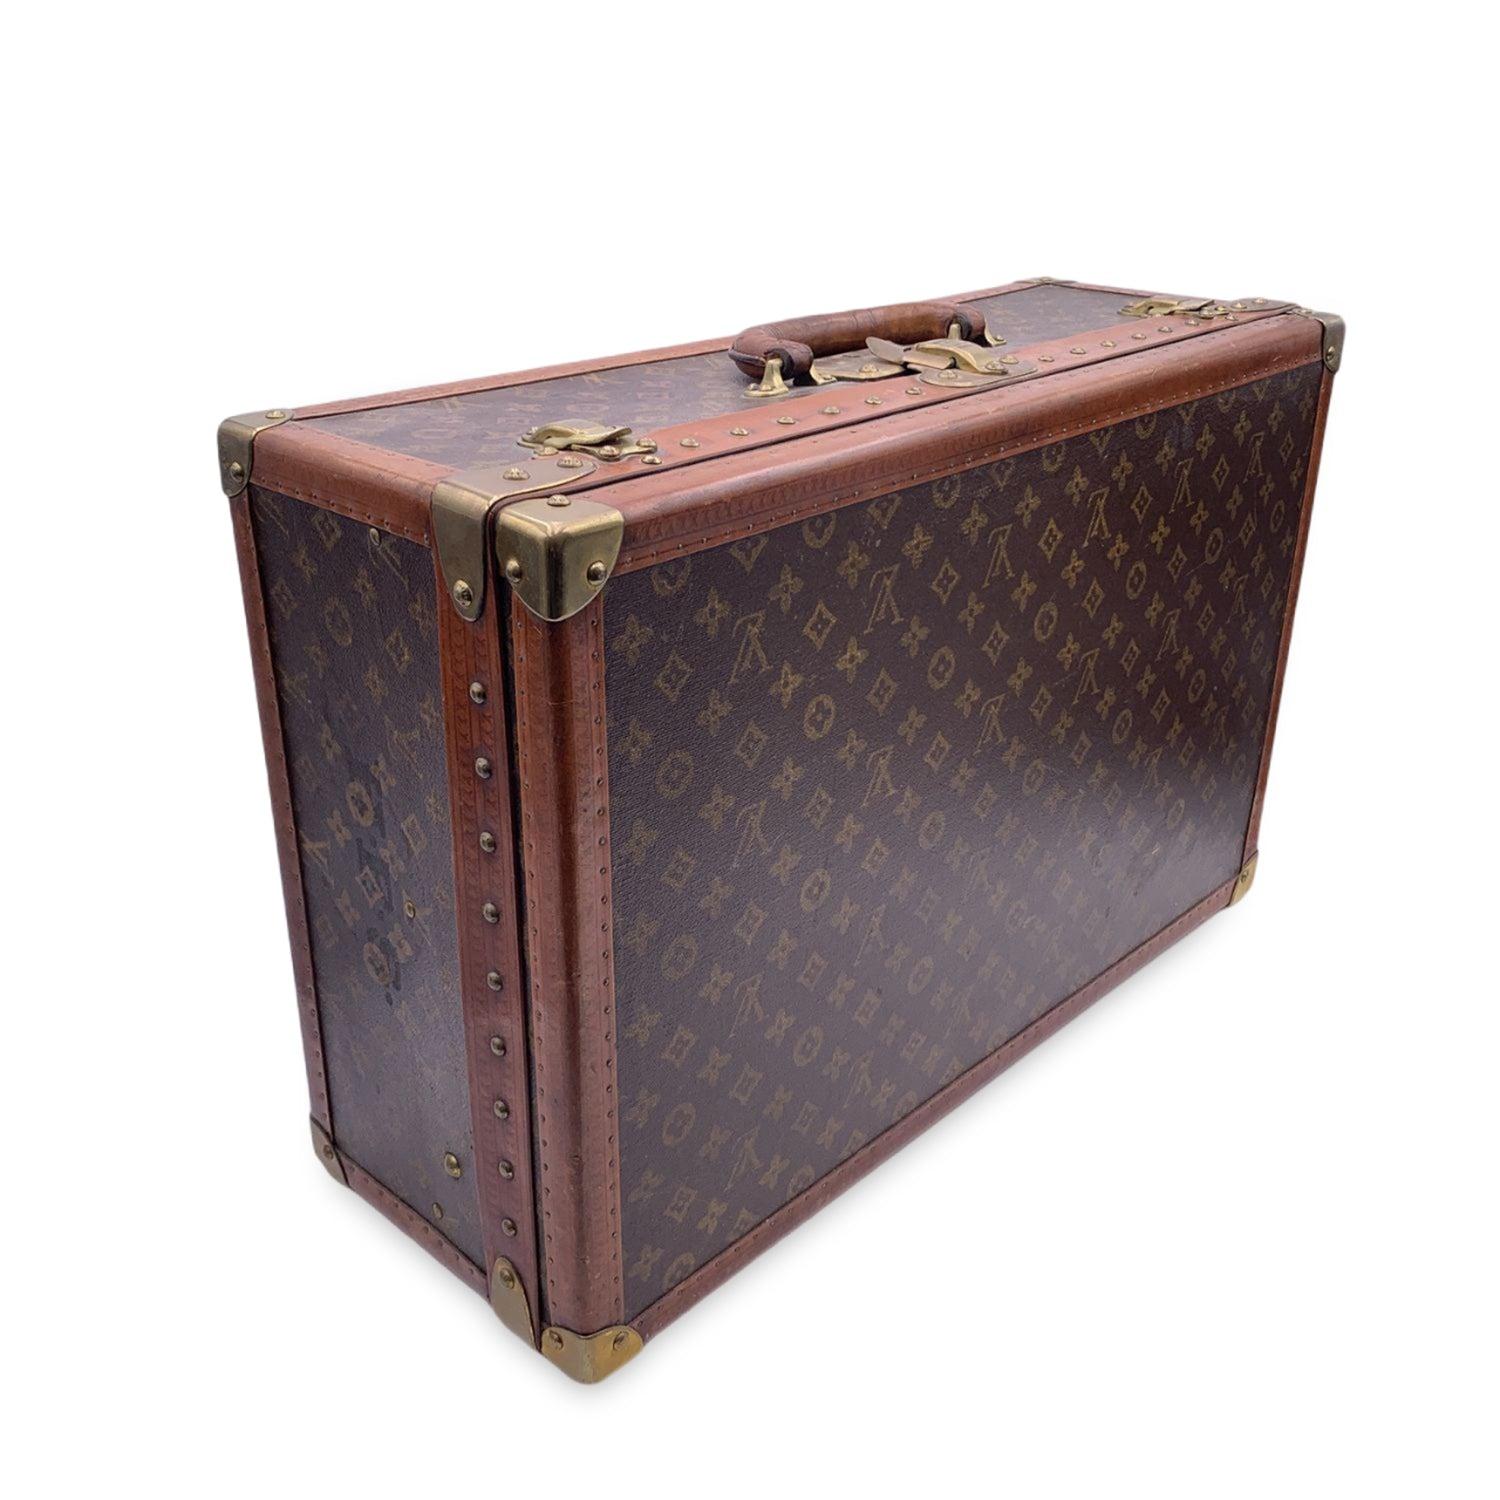 Rare LOUIS VUITTON vintage Monogram 'Alzer 60' Suitcase bag. A part of Louis Vuitton history, ideal for travel or for home or office decor. Hard-sided case, mid-20th-century, originally purchased from D.Altman in New York. The exterior is finished